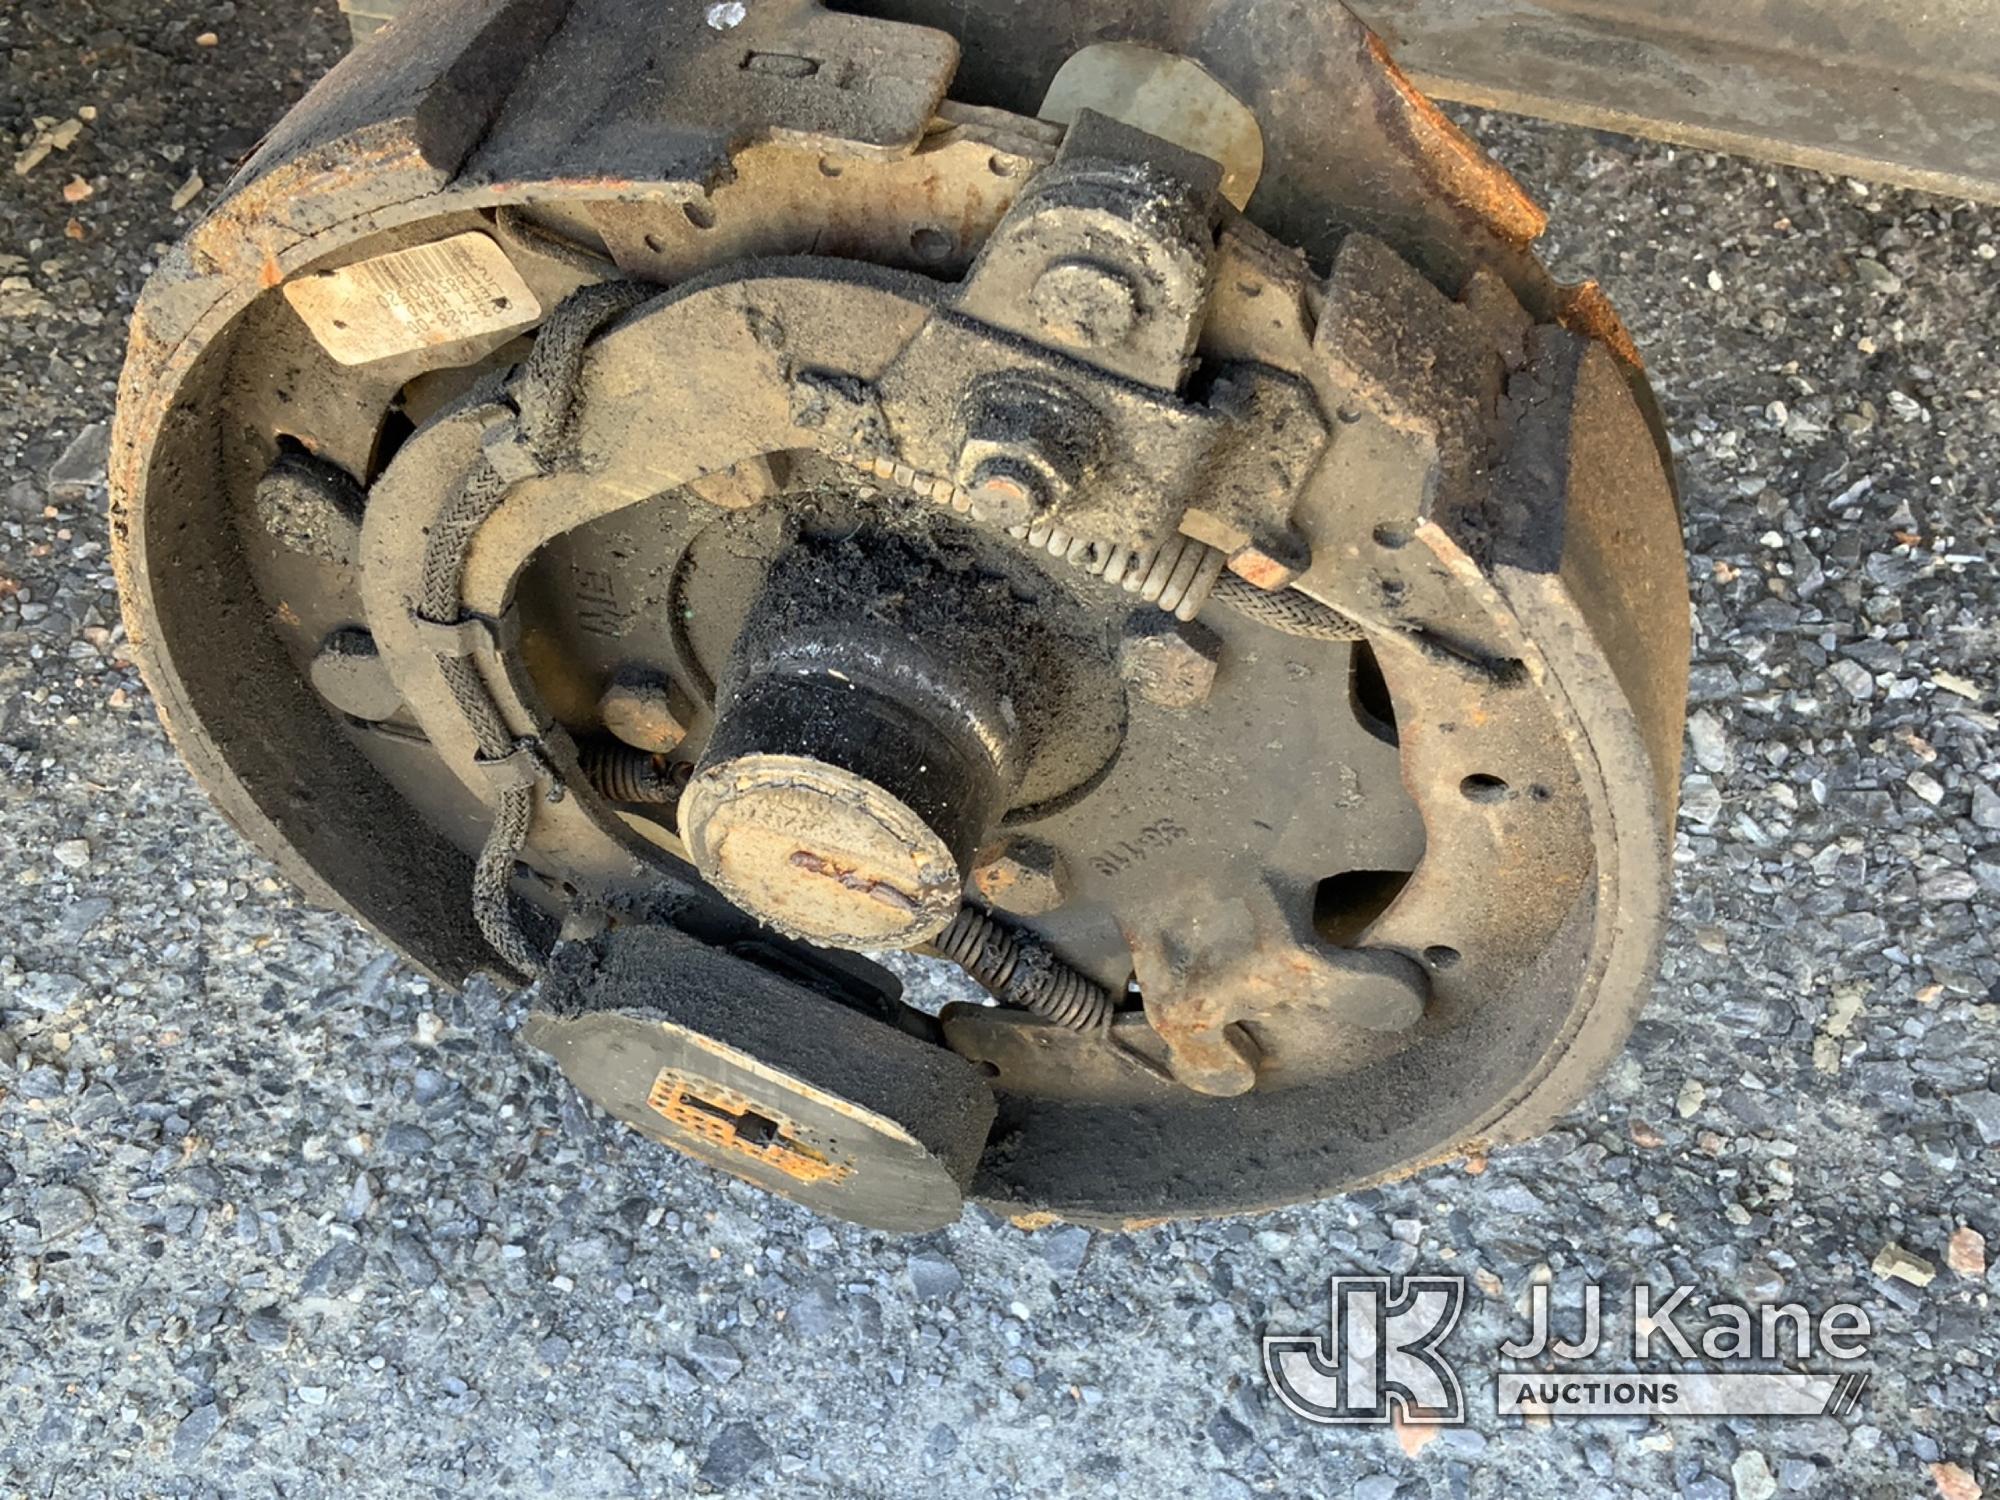 (Shelby, NC) 2017 Towmaster T/A Tagalong Equipment Trailer Seller States: Wheels Hub Broke Off, Need